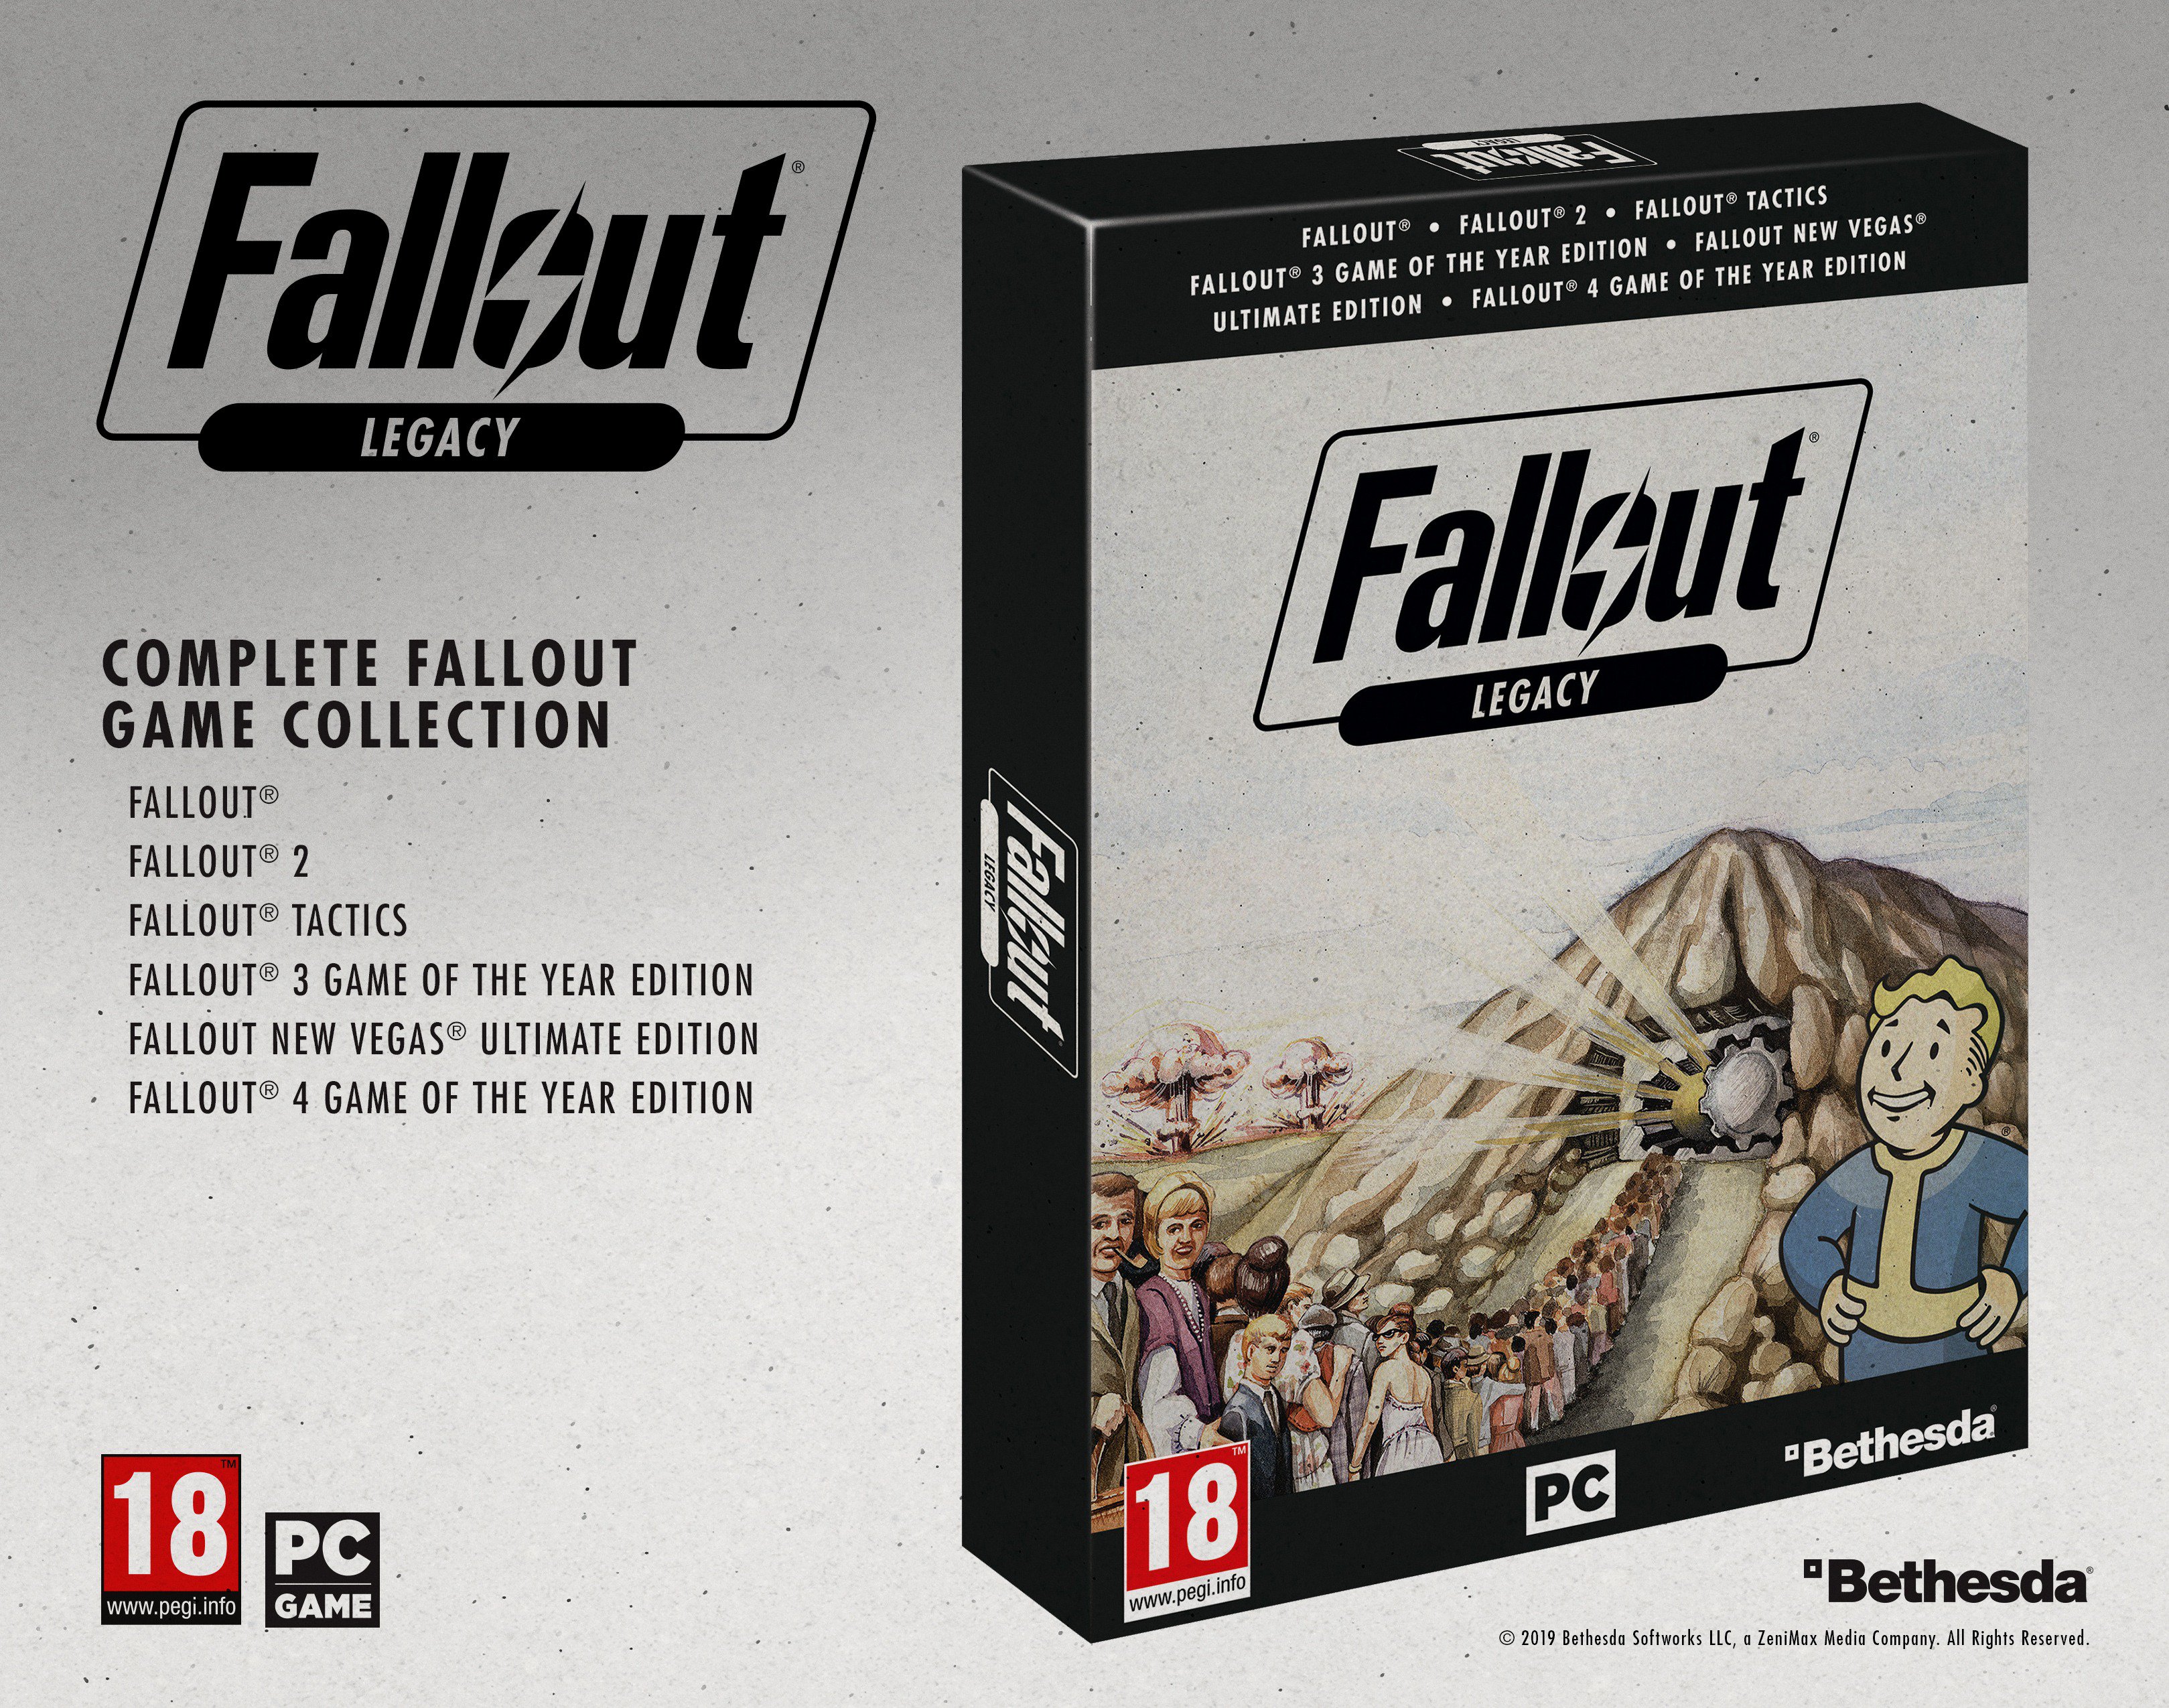 Bethesda Uk Please Stand By For Pre Order In The Uk A Collection Of Fallout Titles For Pc Featuring Fallout Fallout 2 Fallout Tactics Fallout 3 Goty Fallout New Vegas Ultimate